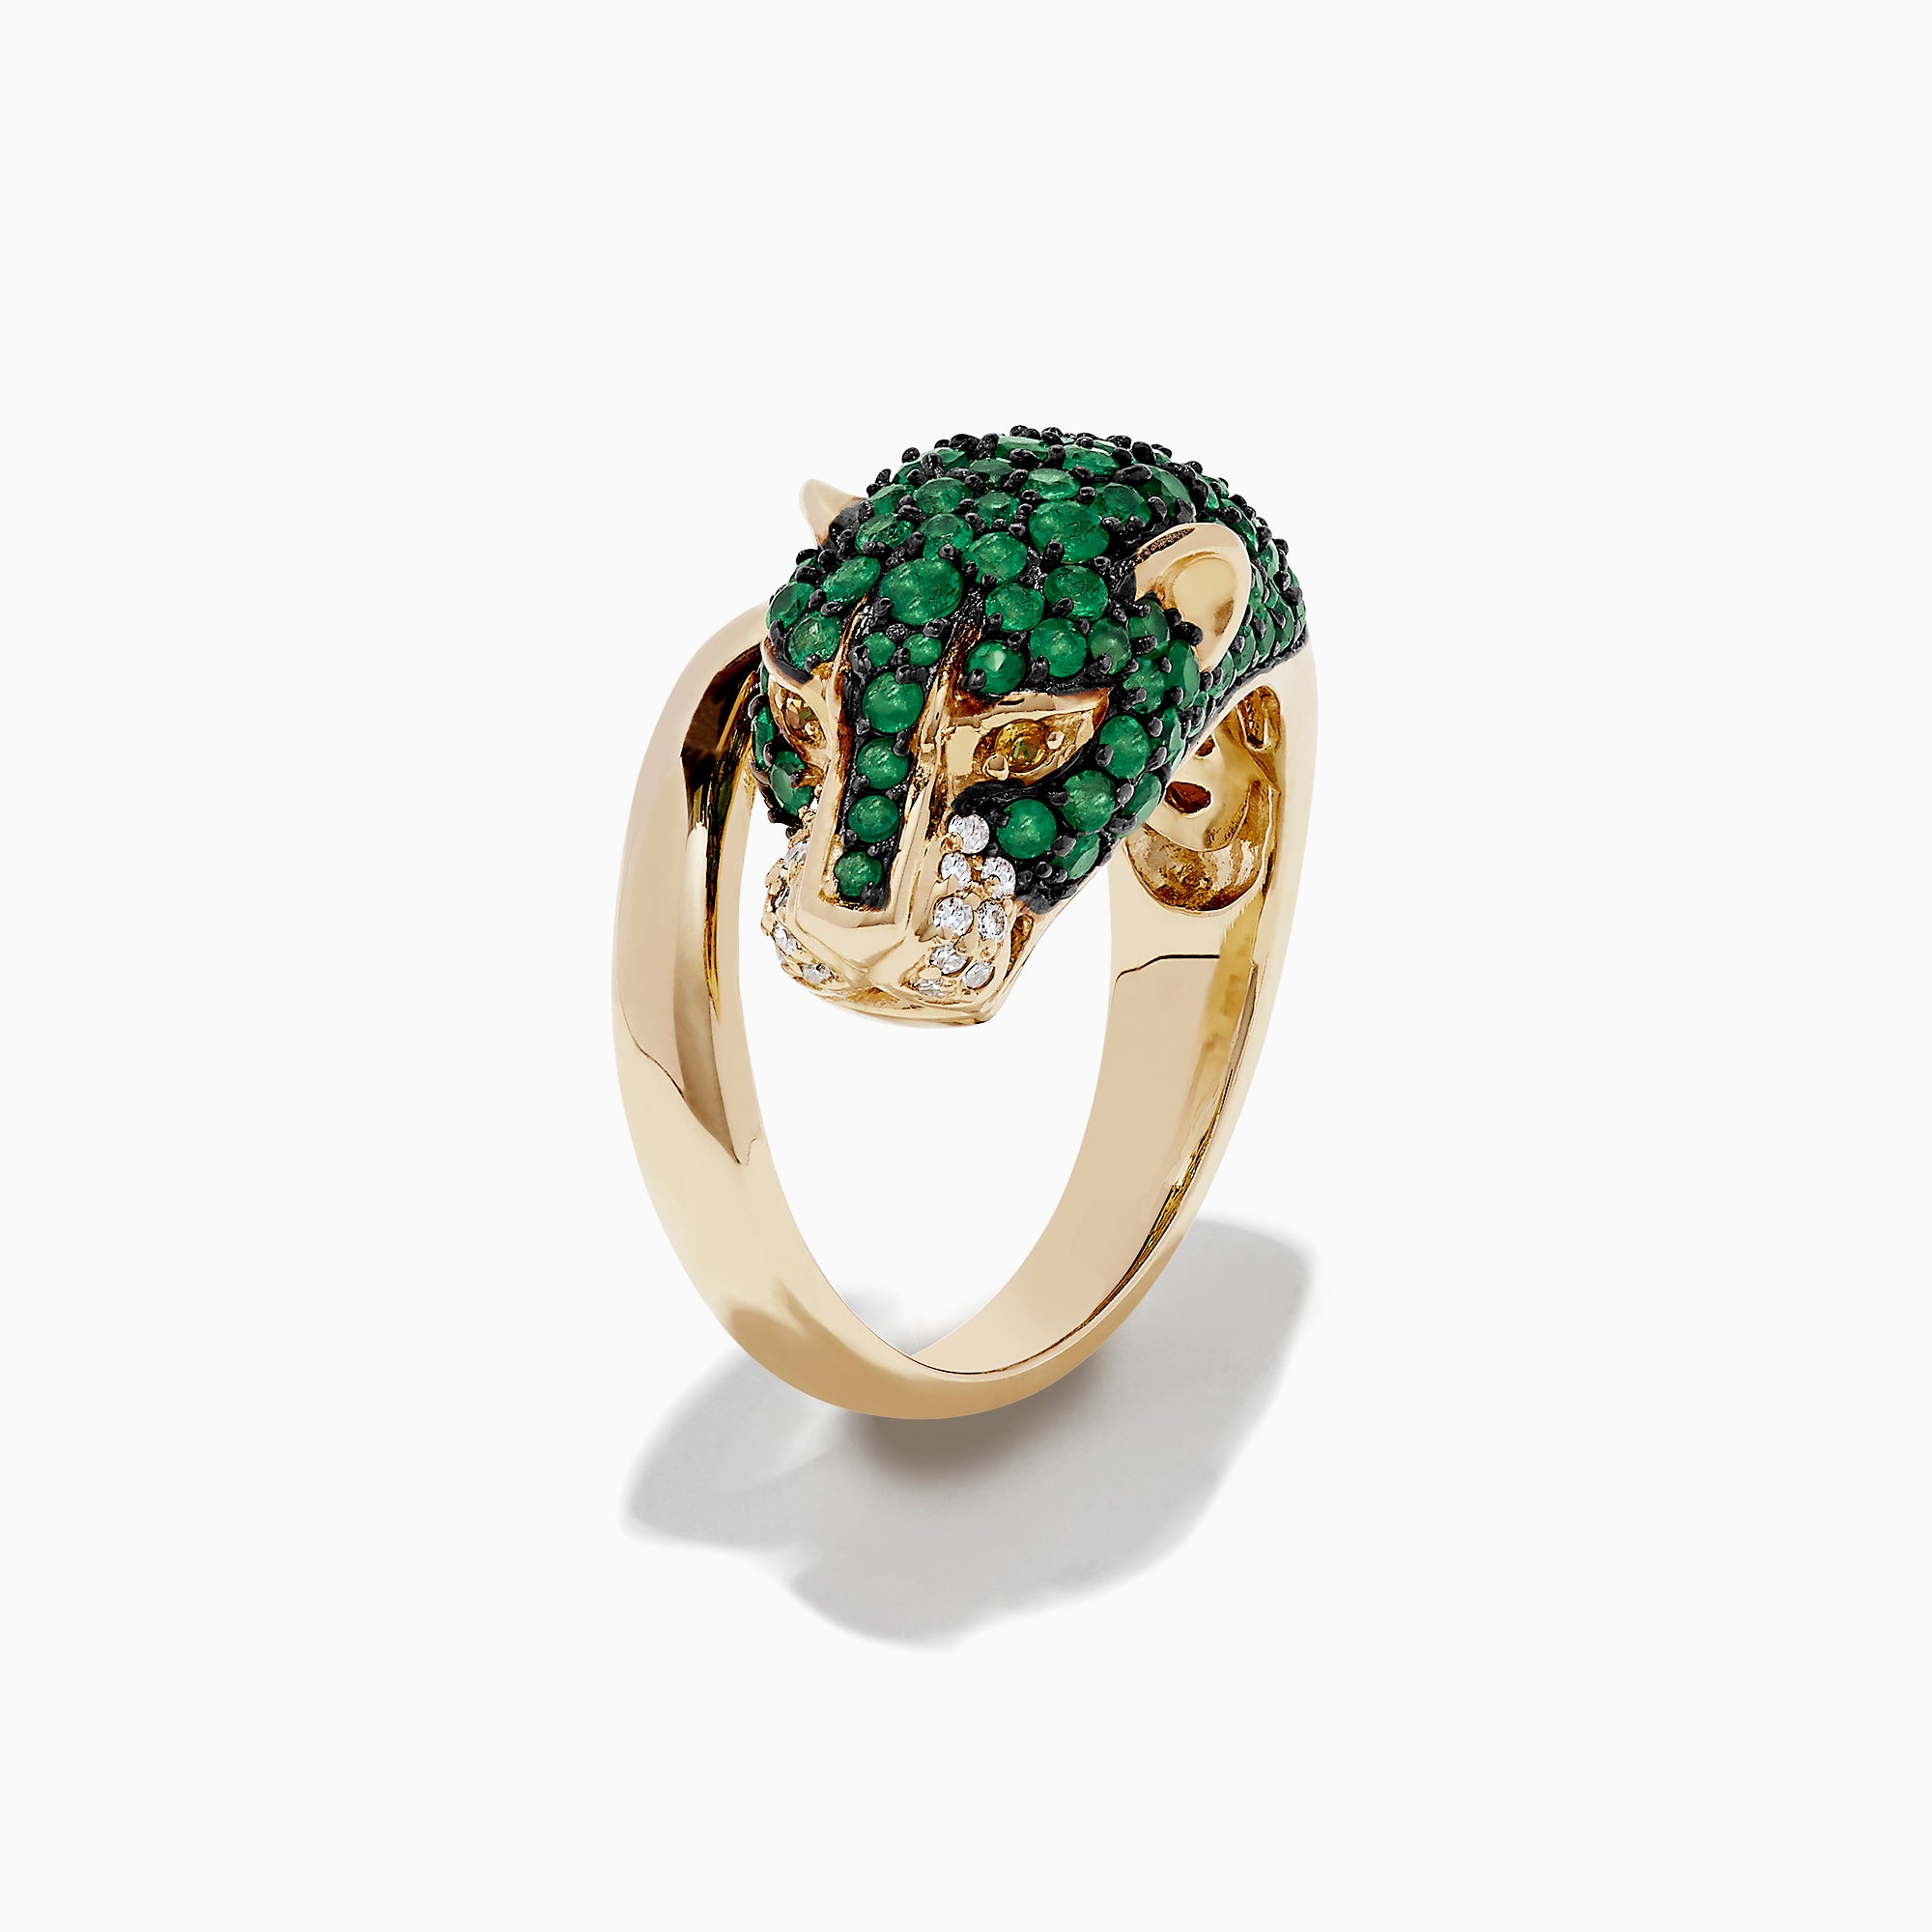 Effy Signature 14K Yellow Gold Emerald and Diamond Panther Ring, 2.48 TCW